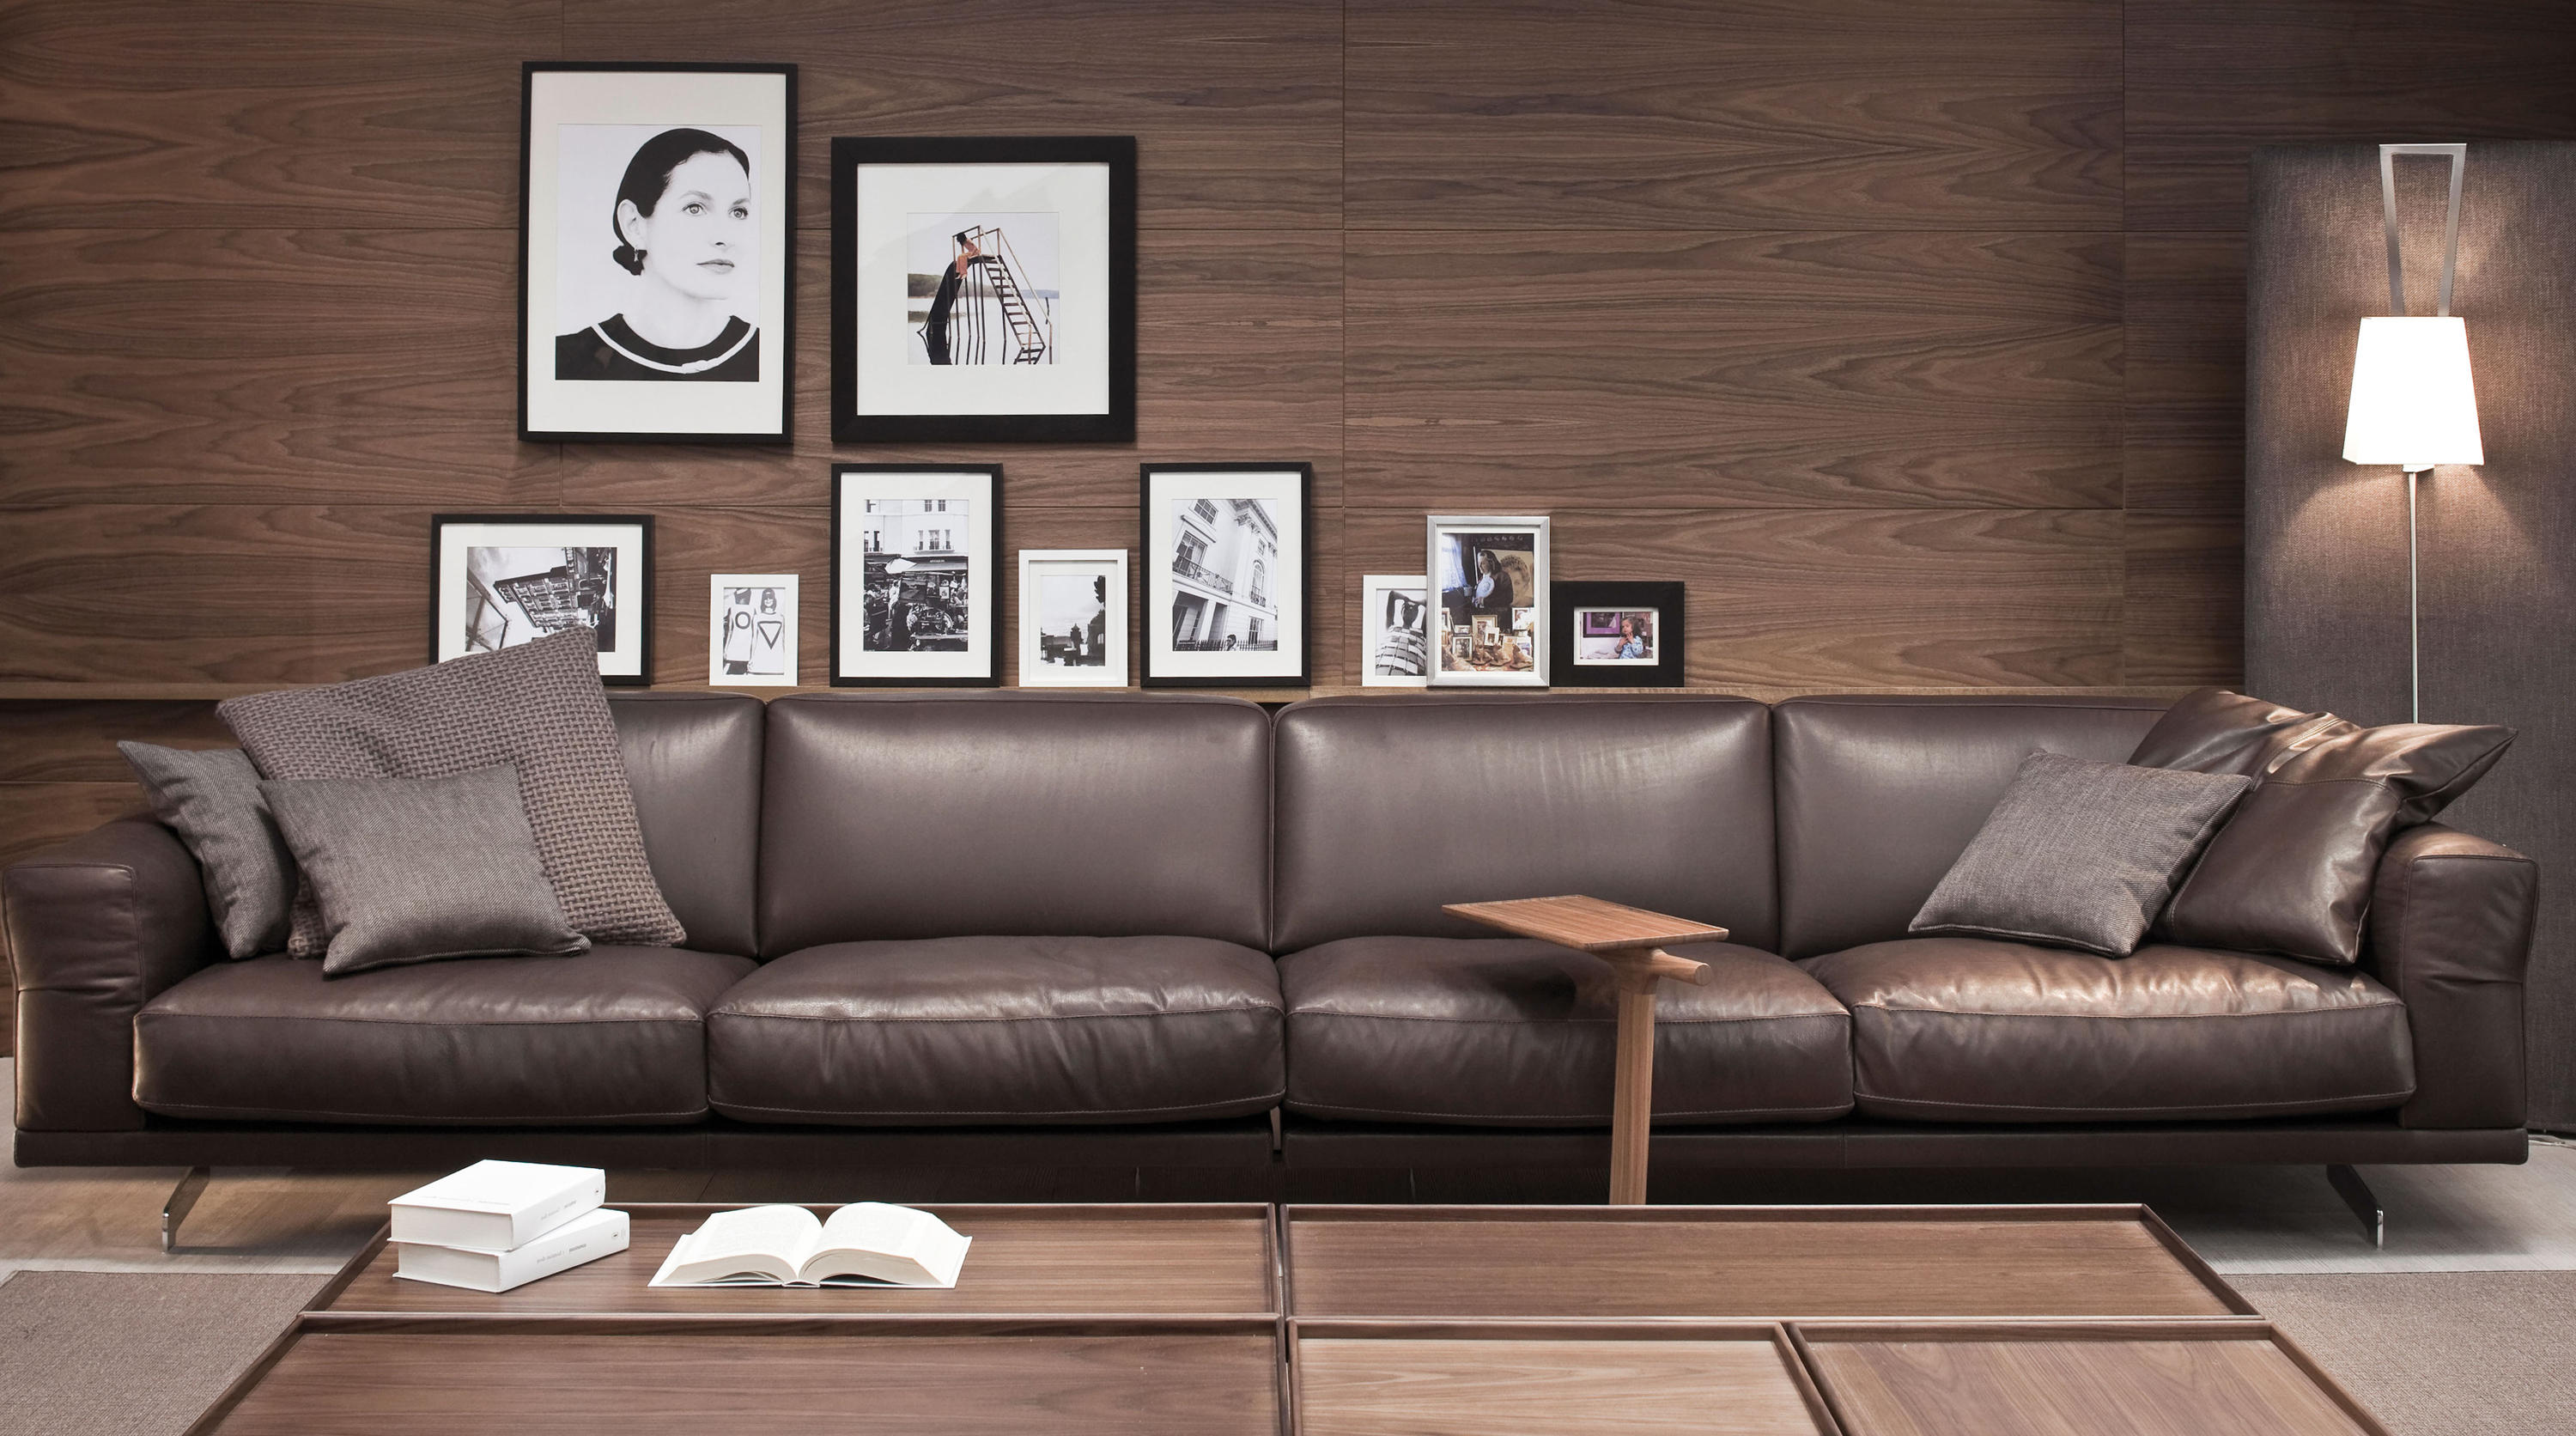 470 Fancy Sofa Sofas From Vibieffe